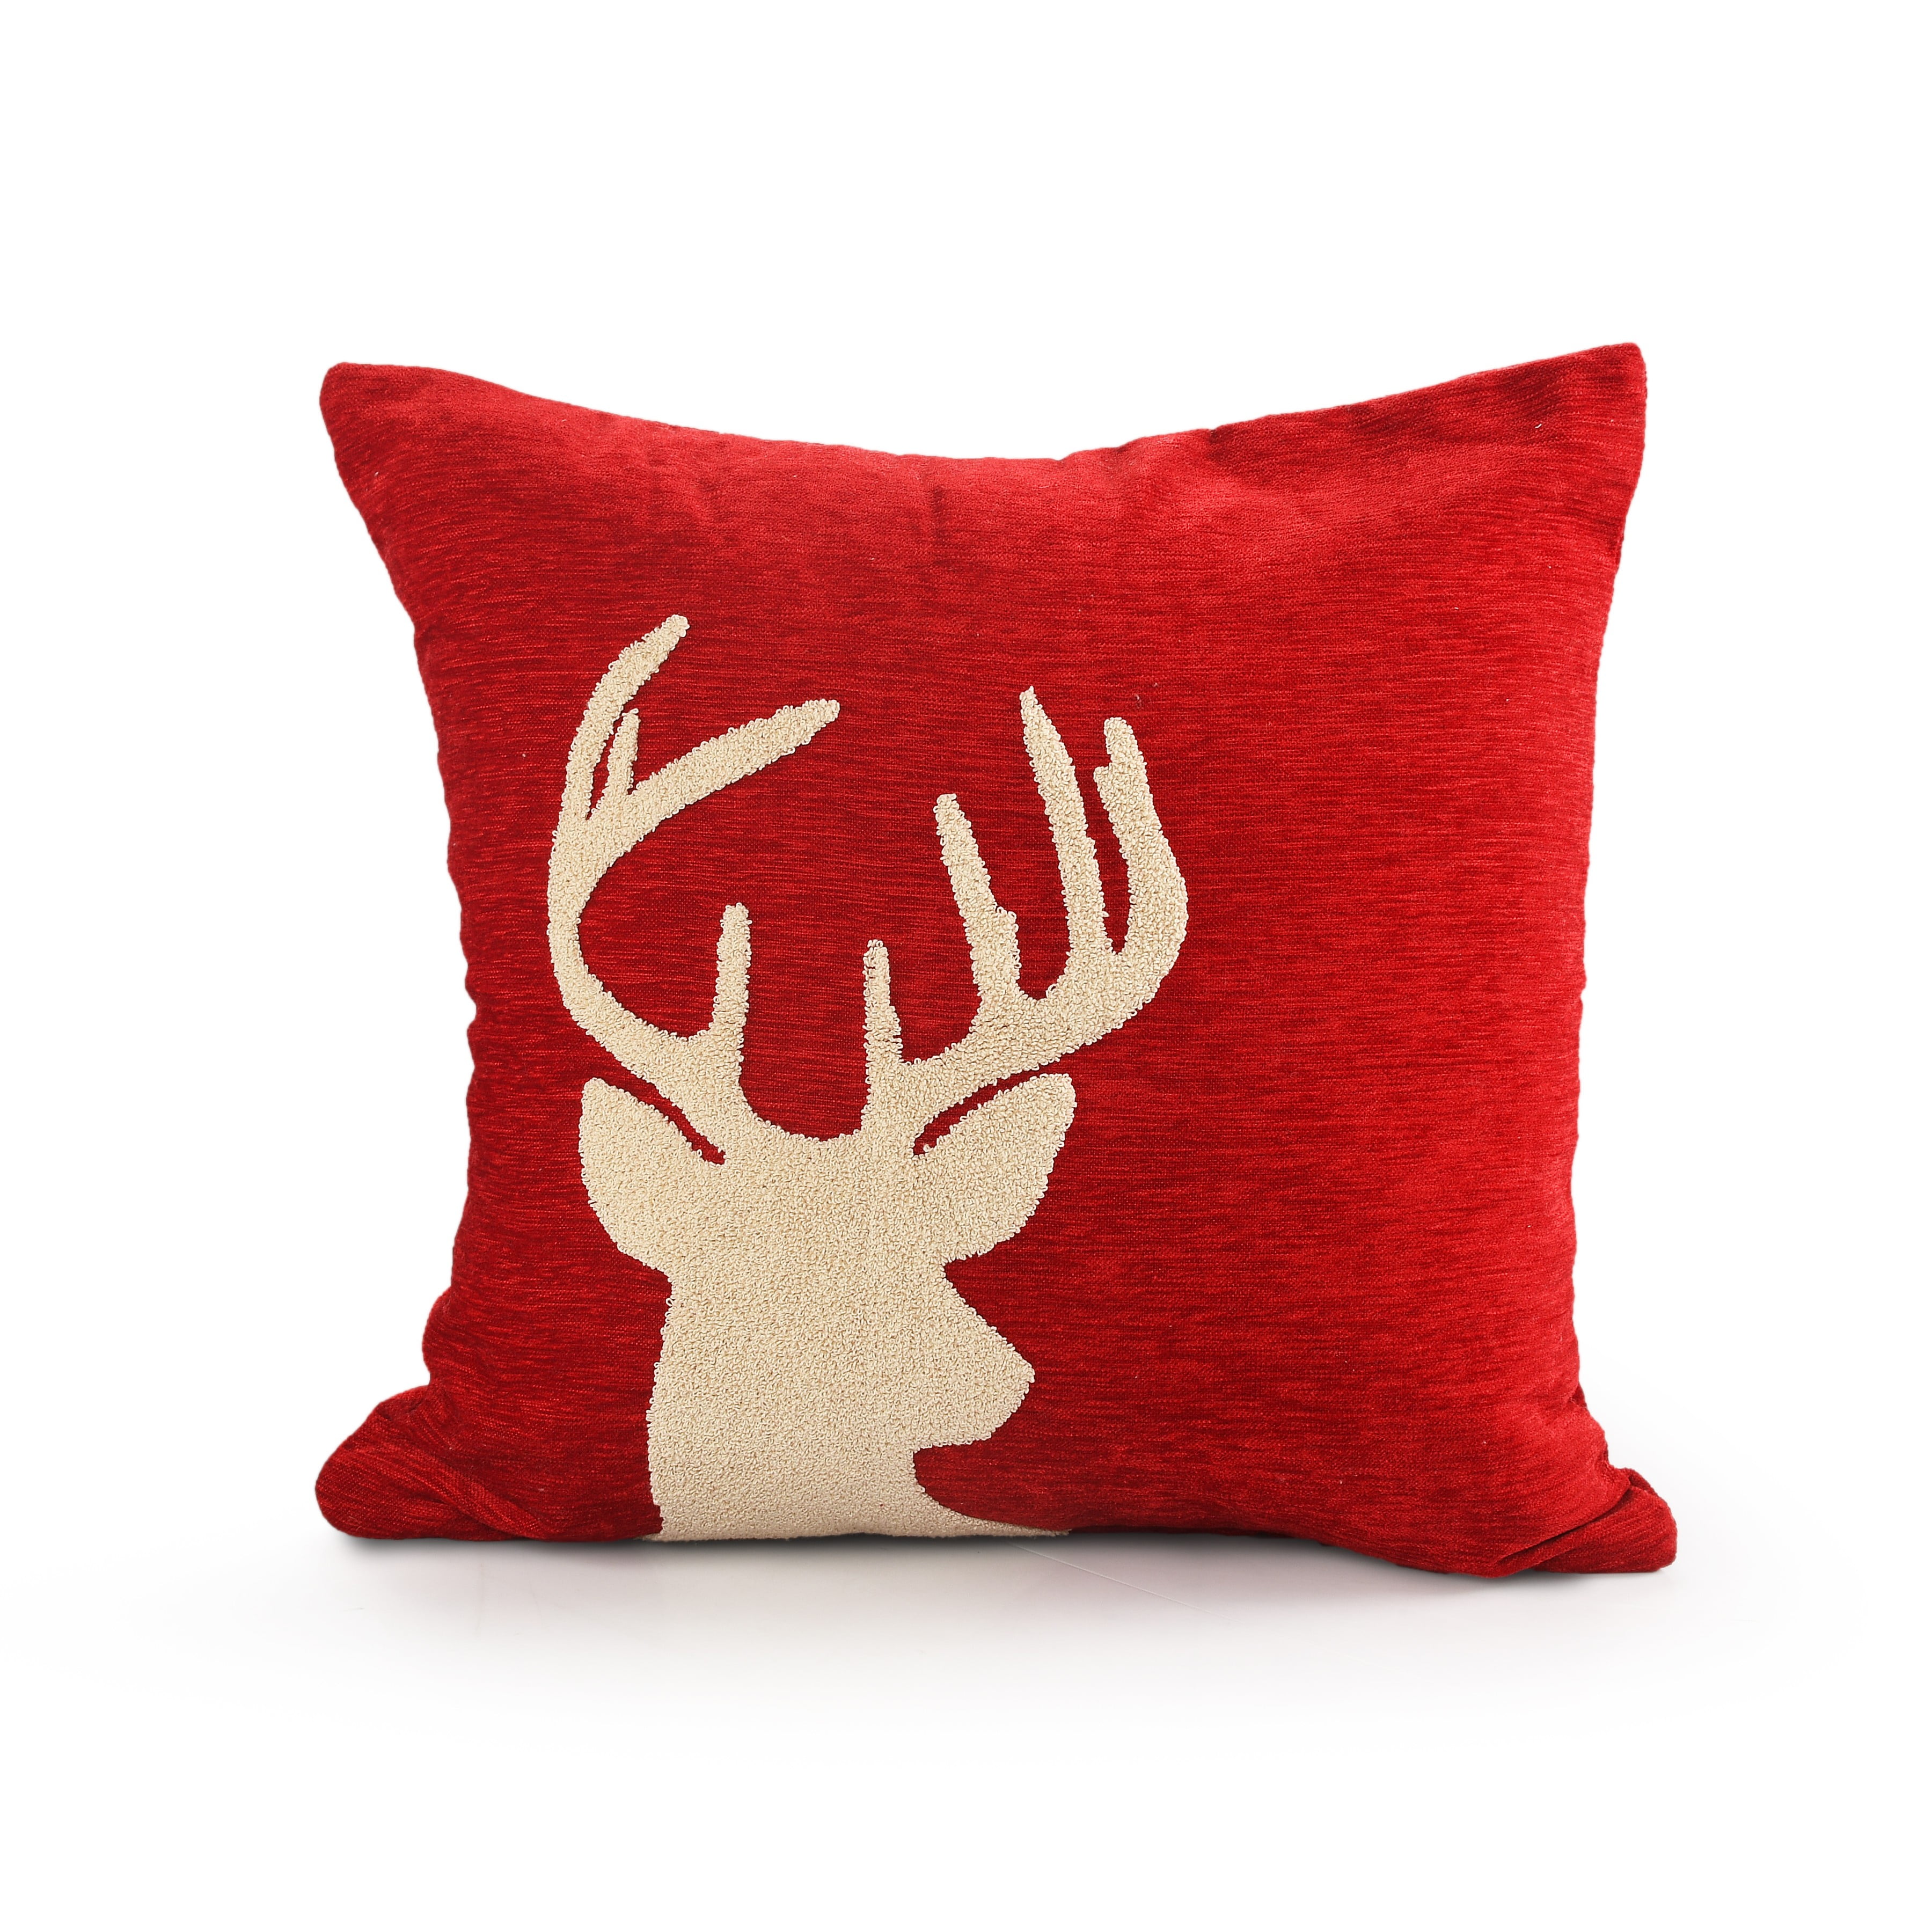 Rustic Red Tartan Cream Stag Head Cushion Cover Country Chic 16 18 20 22 24 inch 